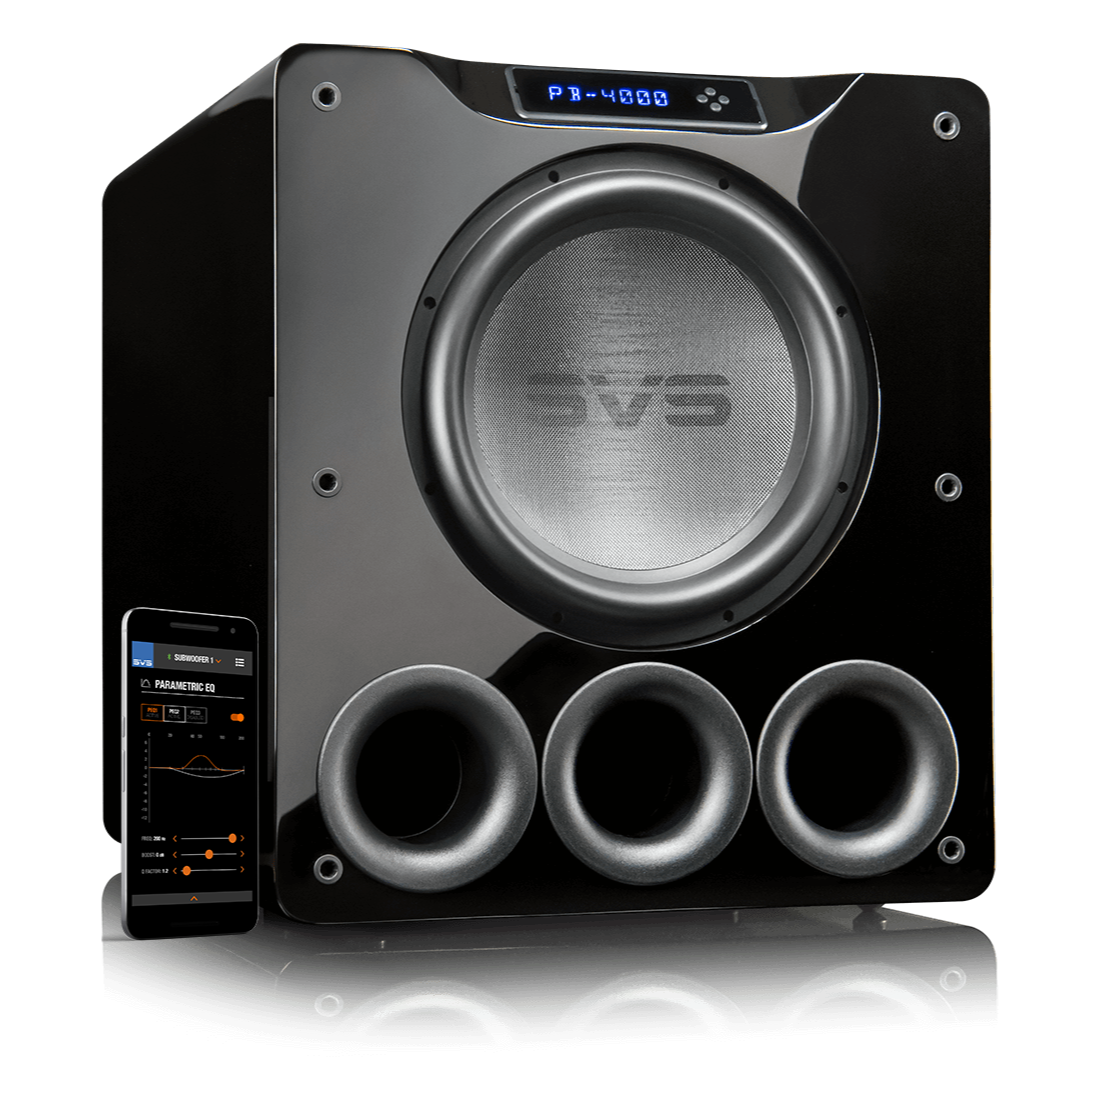 Setting all performance benchmarks for ported subwoofers in its class, PB-4000 unleashes heart-pounding output and infrasonic deep bass extension with pinpoint accuracy. Brutally powerful yet subtle and nuanced, you’ll never think of bass the same way again. PB-4000 Thunderous low frequency output and extreme deep bass extension